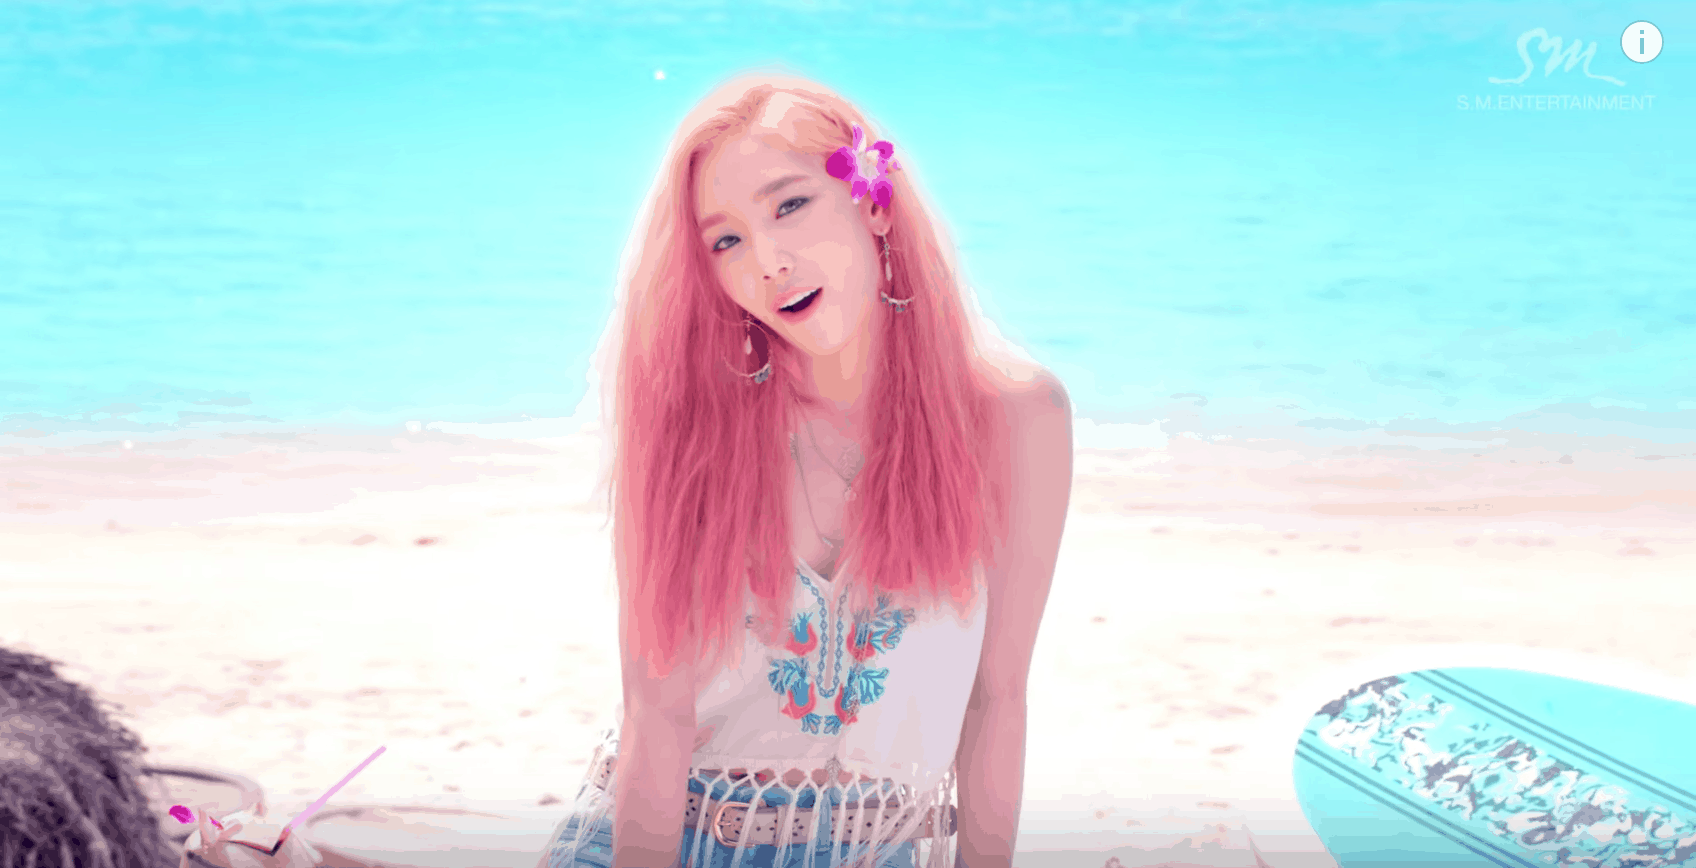 Girls Generation Party Music Video fashion - Band member with pink hair wears a fringe crop top in pink, hoop earrings, denim shorts, a belt, and a flower in her hair